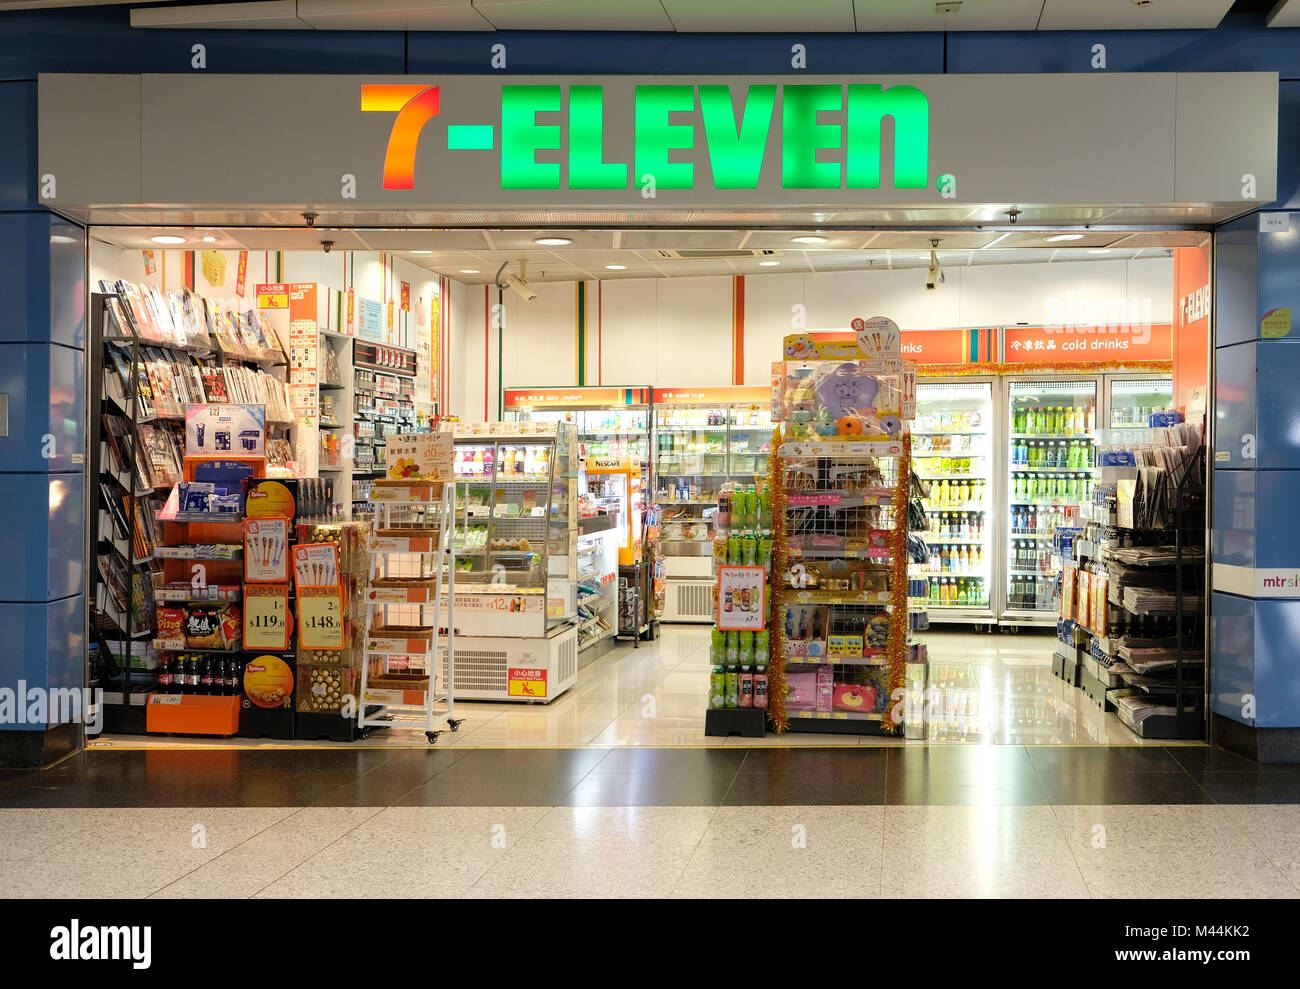 Hong Kong - February 11, 2018: 7-Eleven shop in Hong Kong. 7-Eleven or 7-11 is an international chain of convenience stores and primarily operates usi Stock Photo